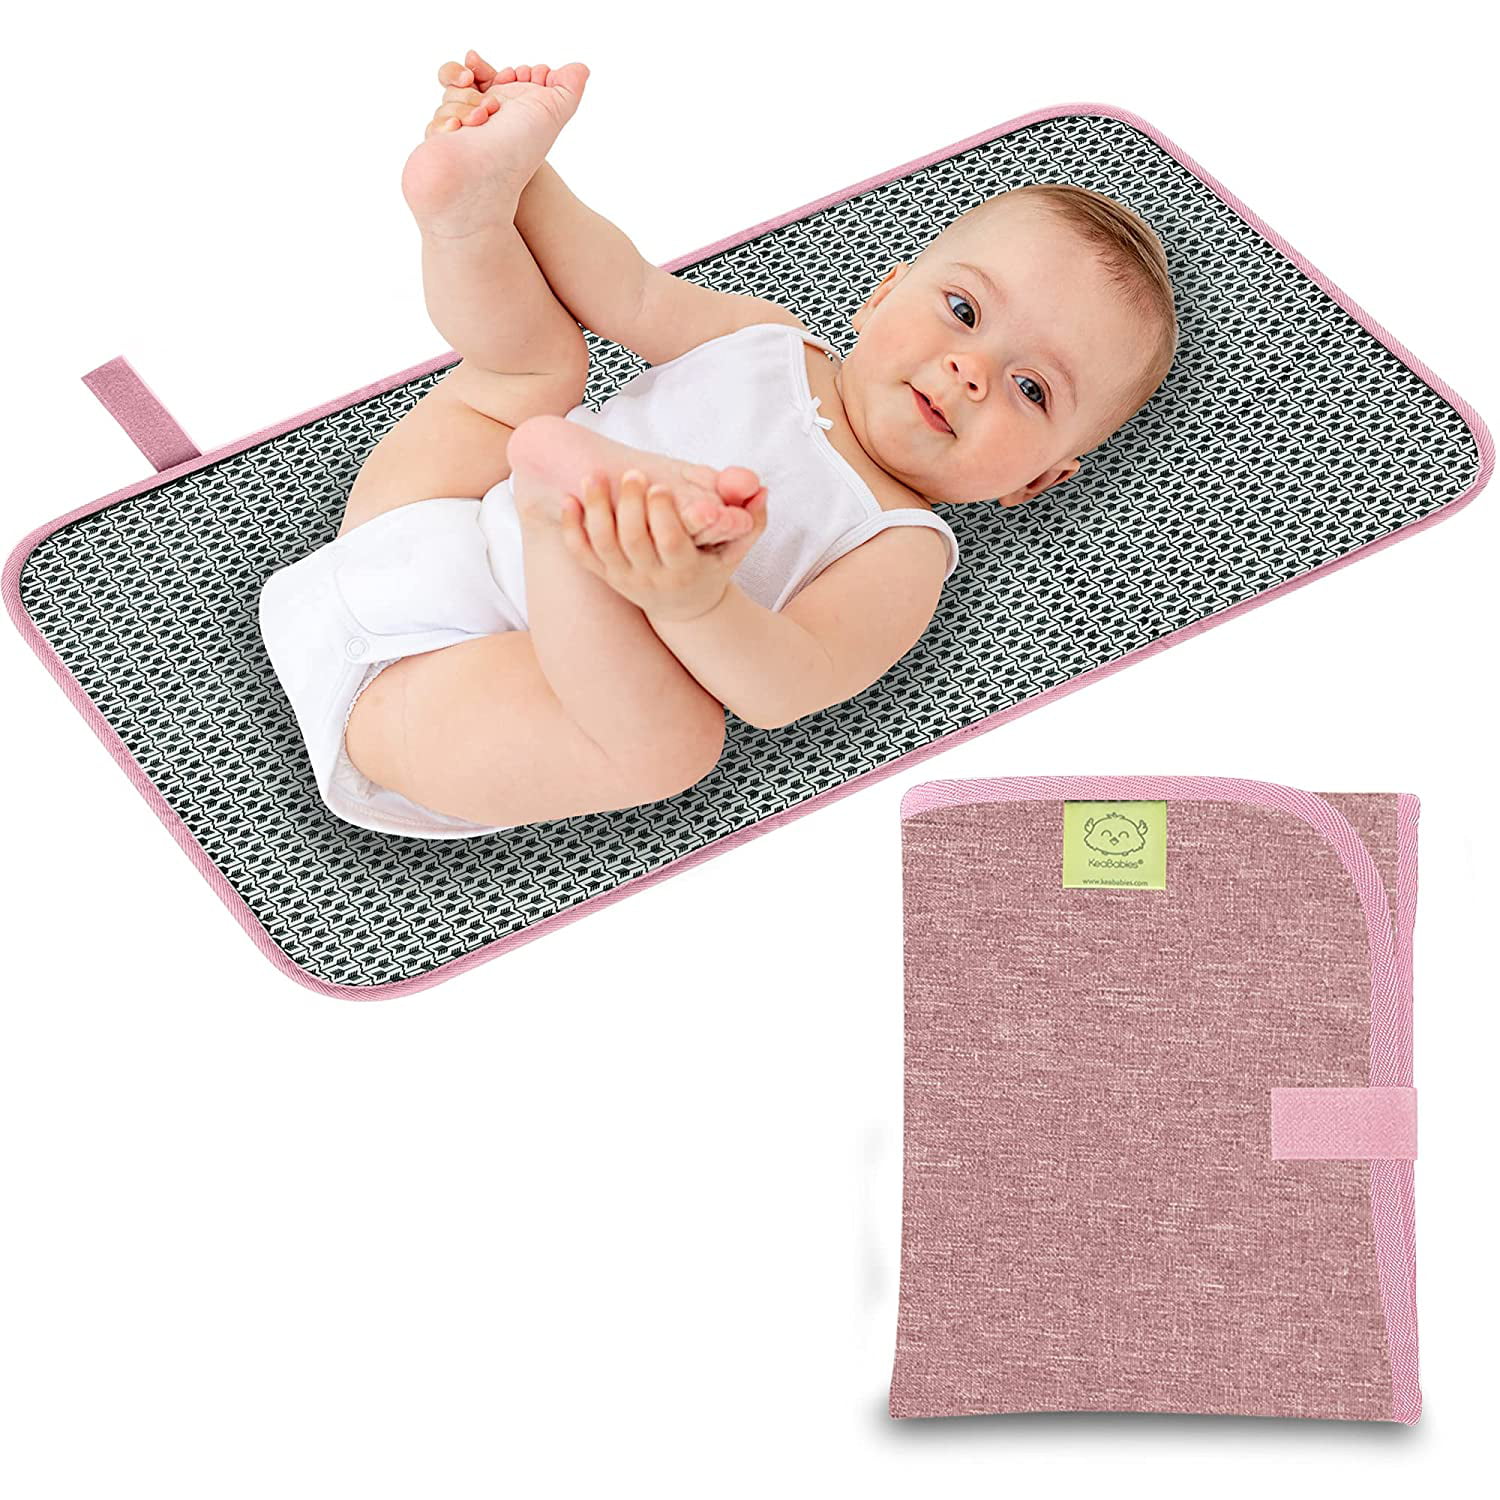 Baby Deluxe Padded Changing Diaper Mats Waterproof Soft PVC Nappy Changer pt 